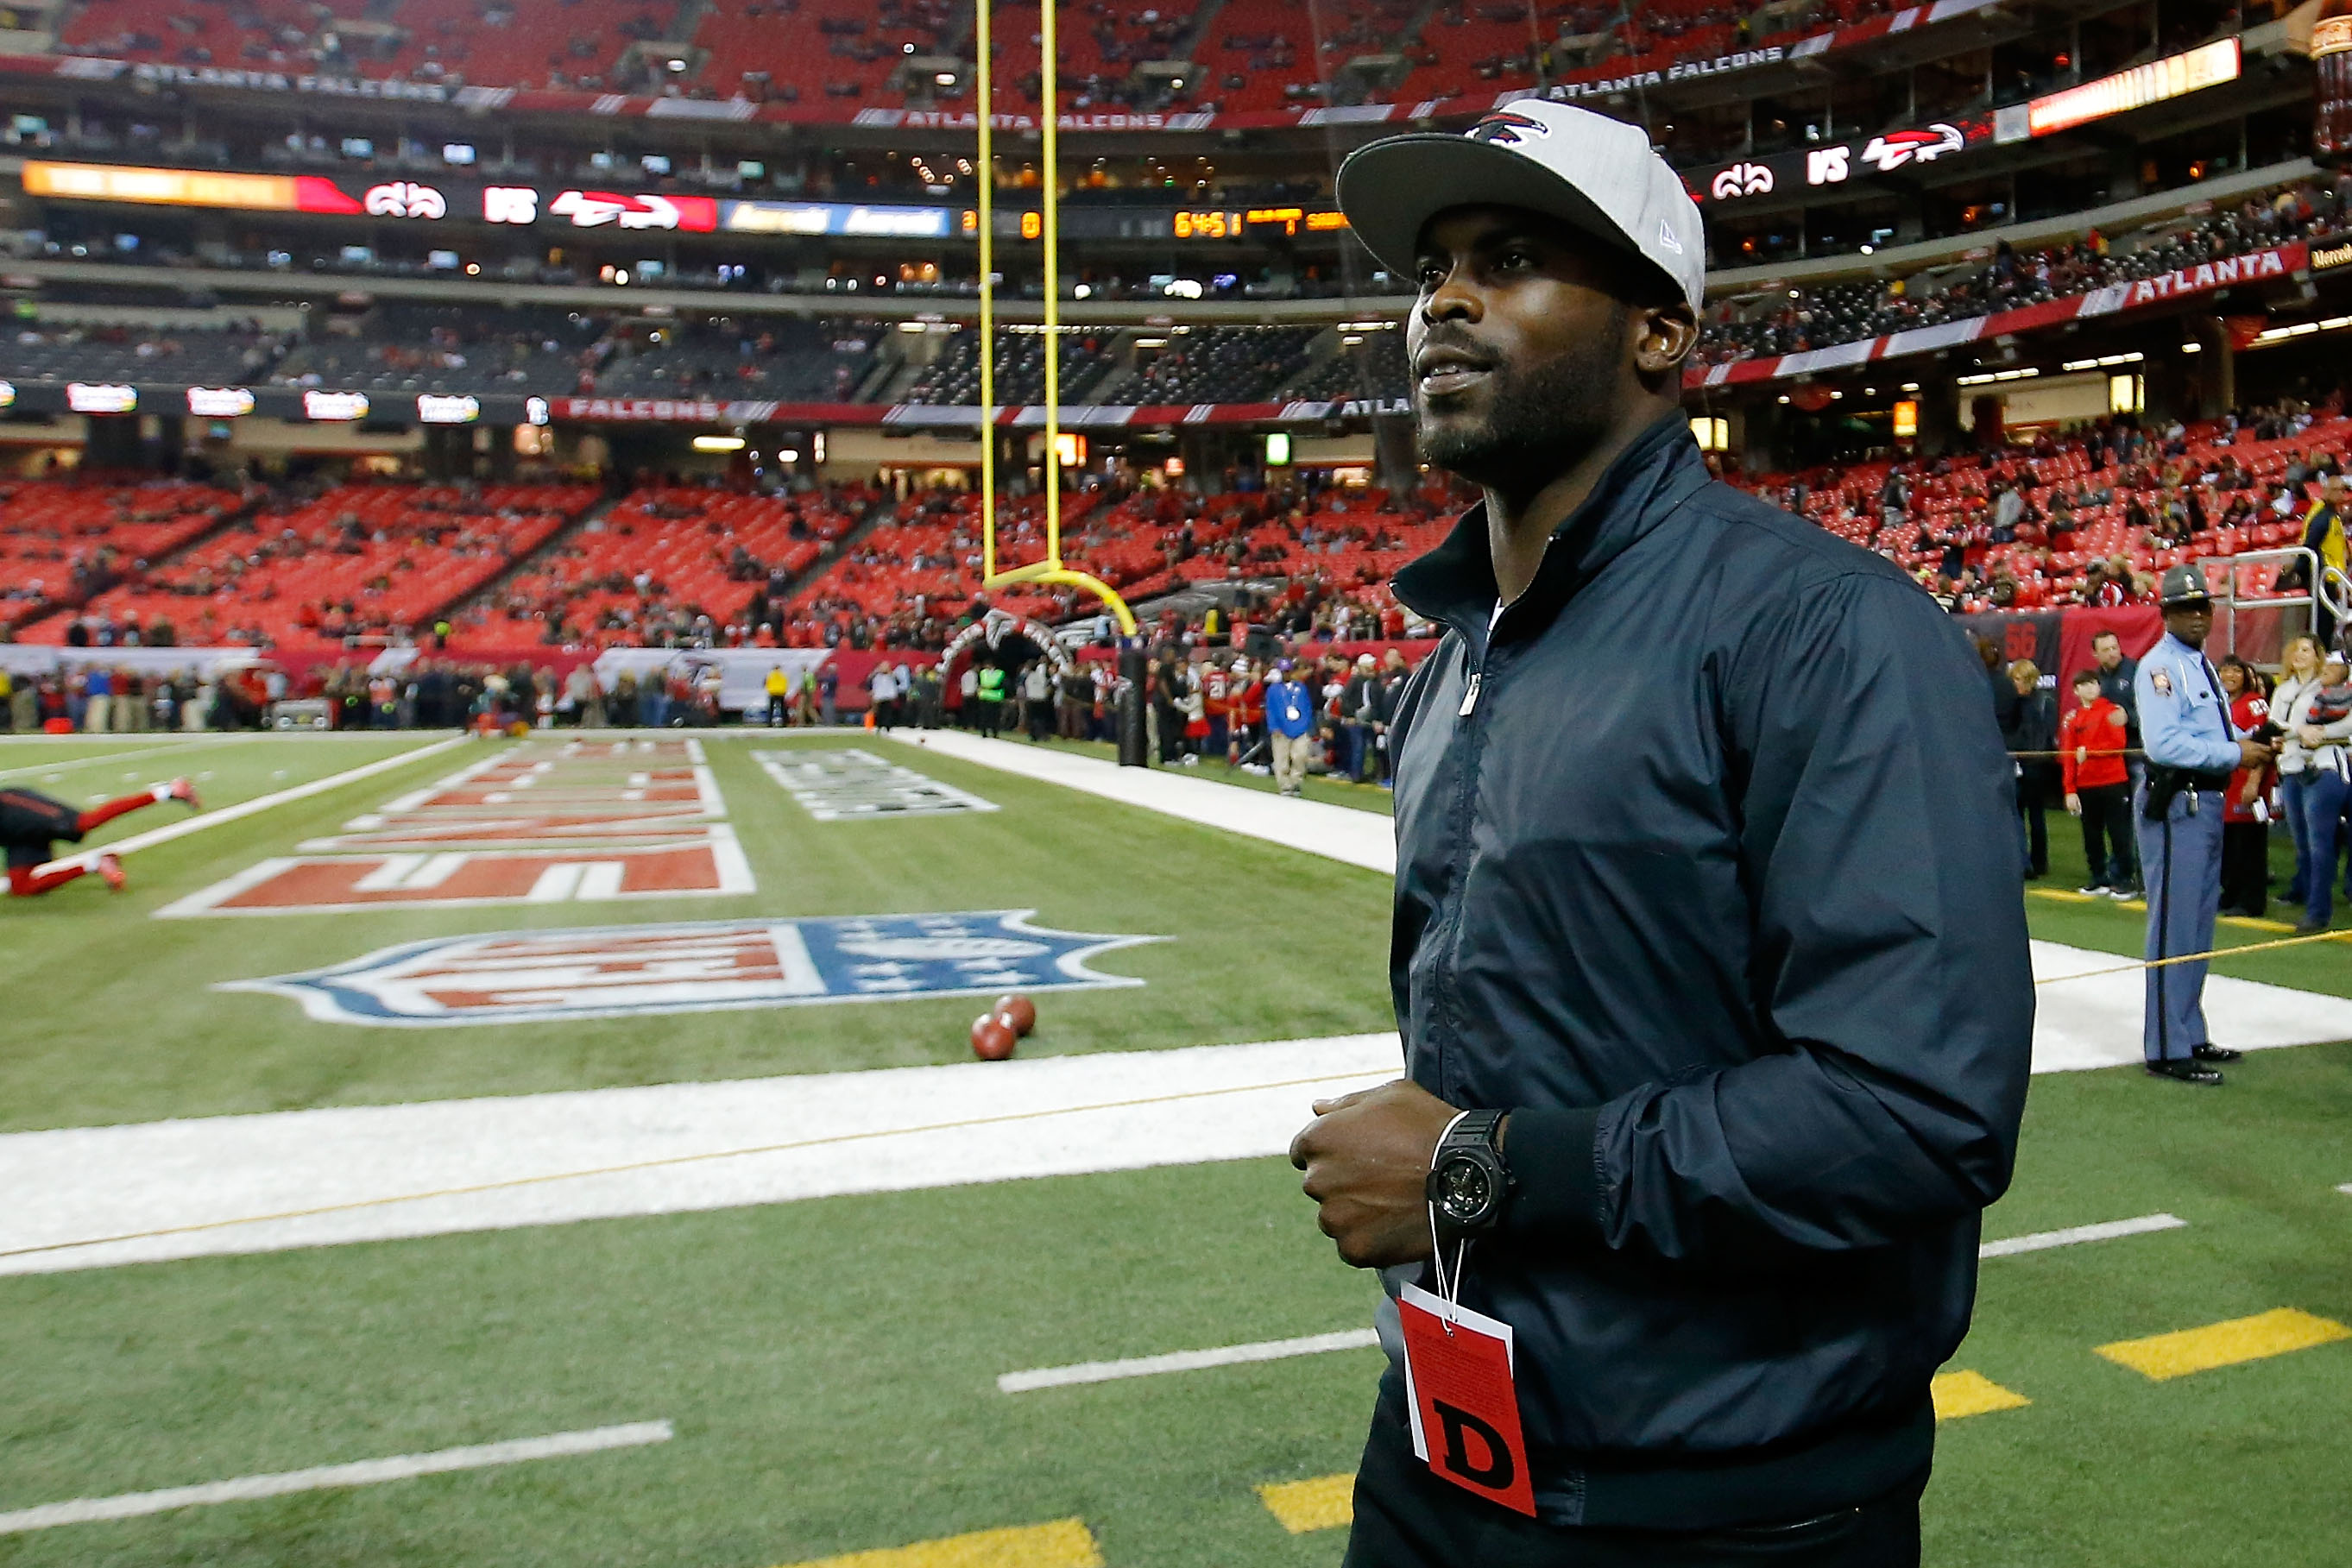 Michael Vick Returns: Atlanta Falcons Icon To Play In New League